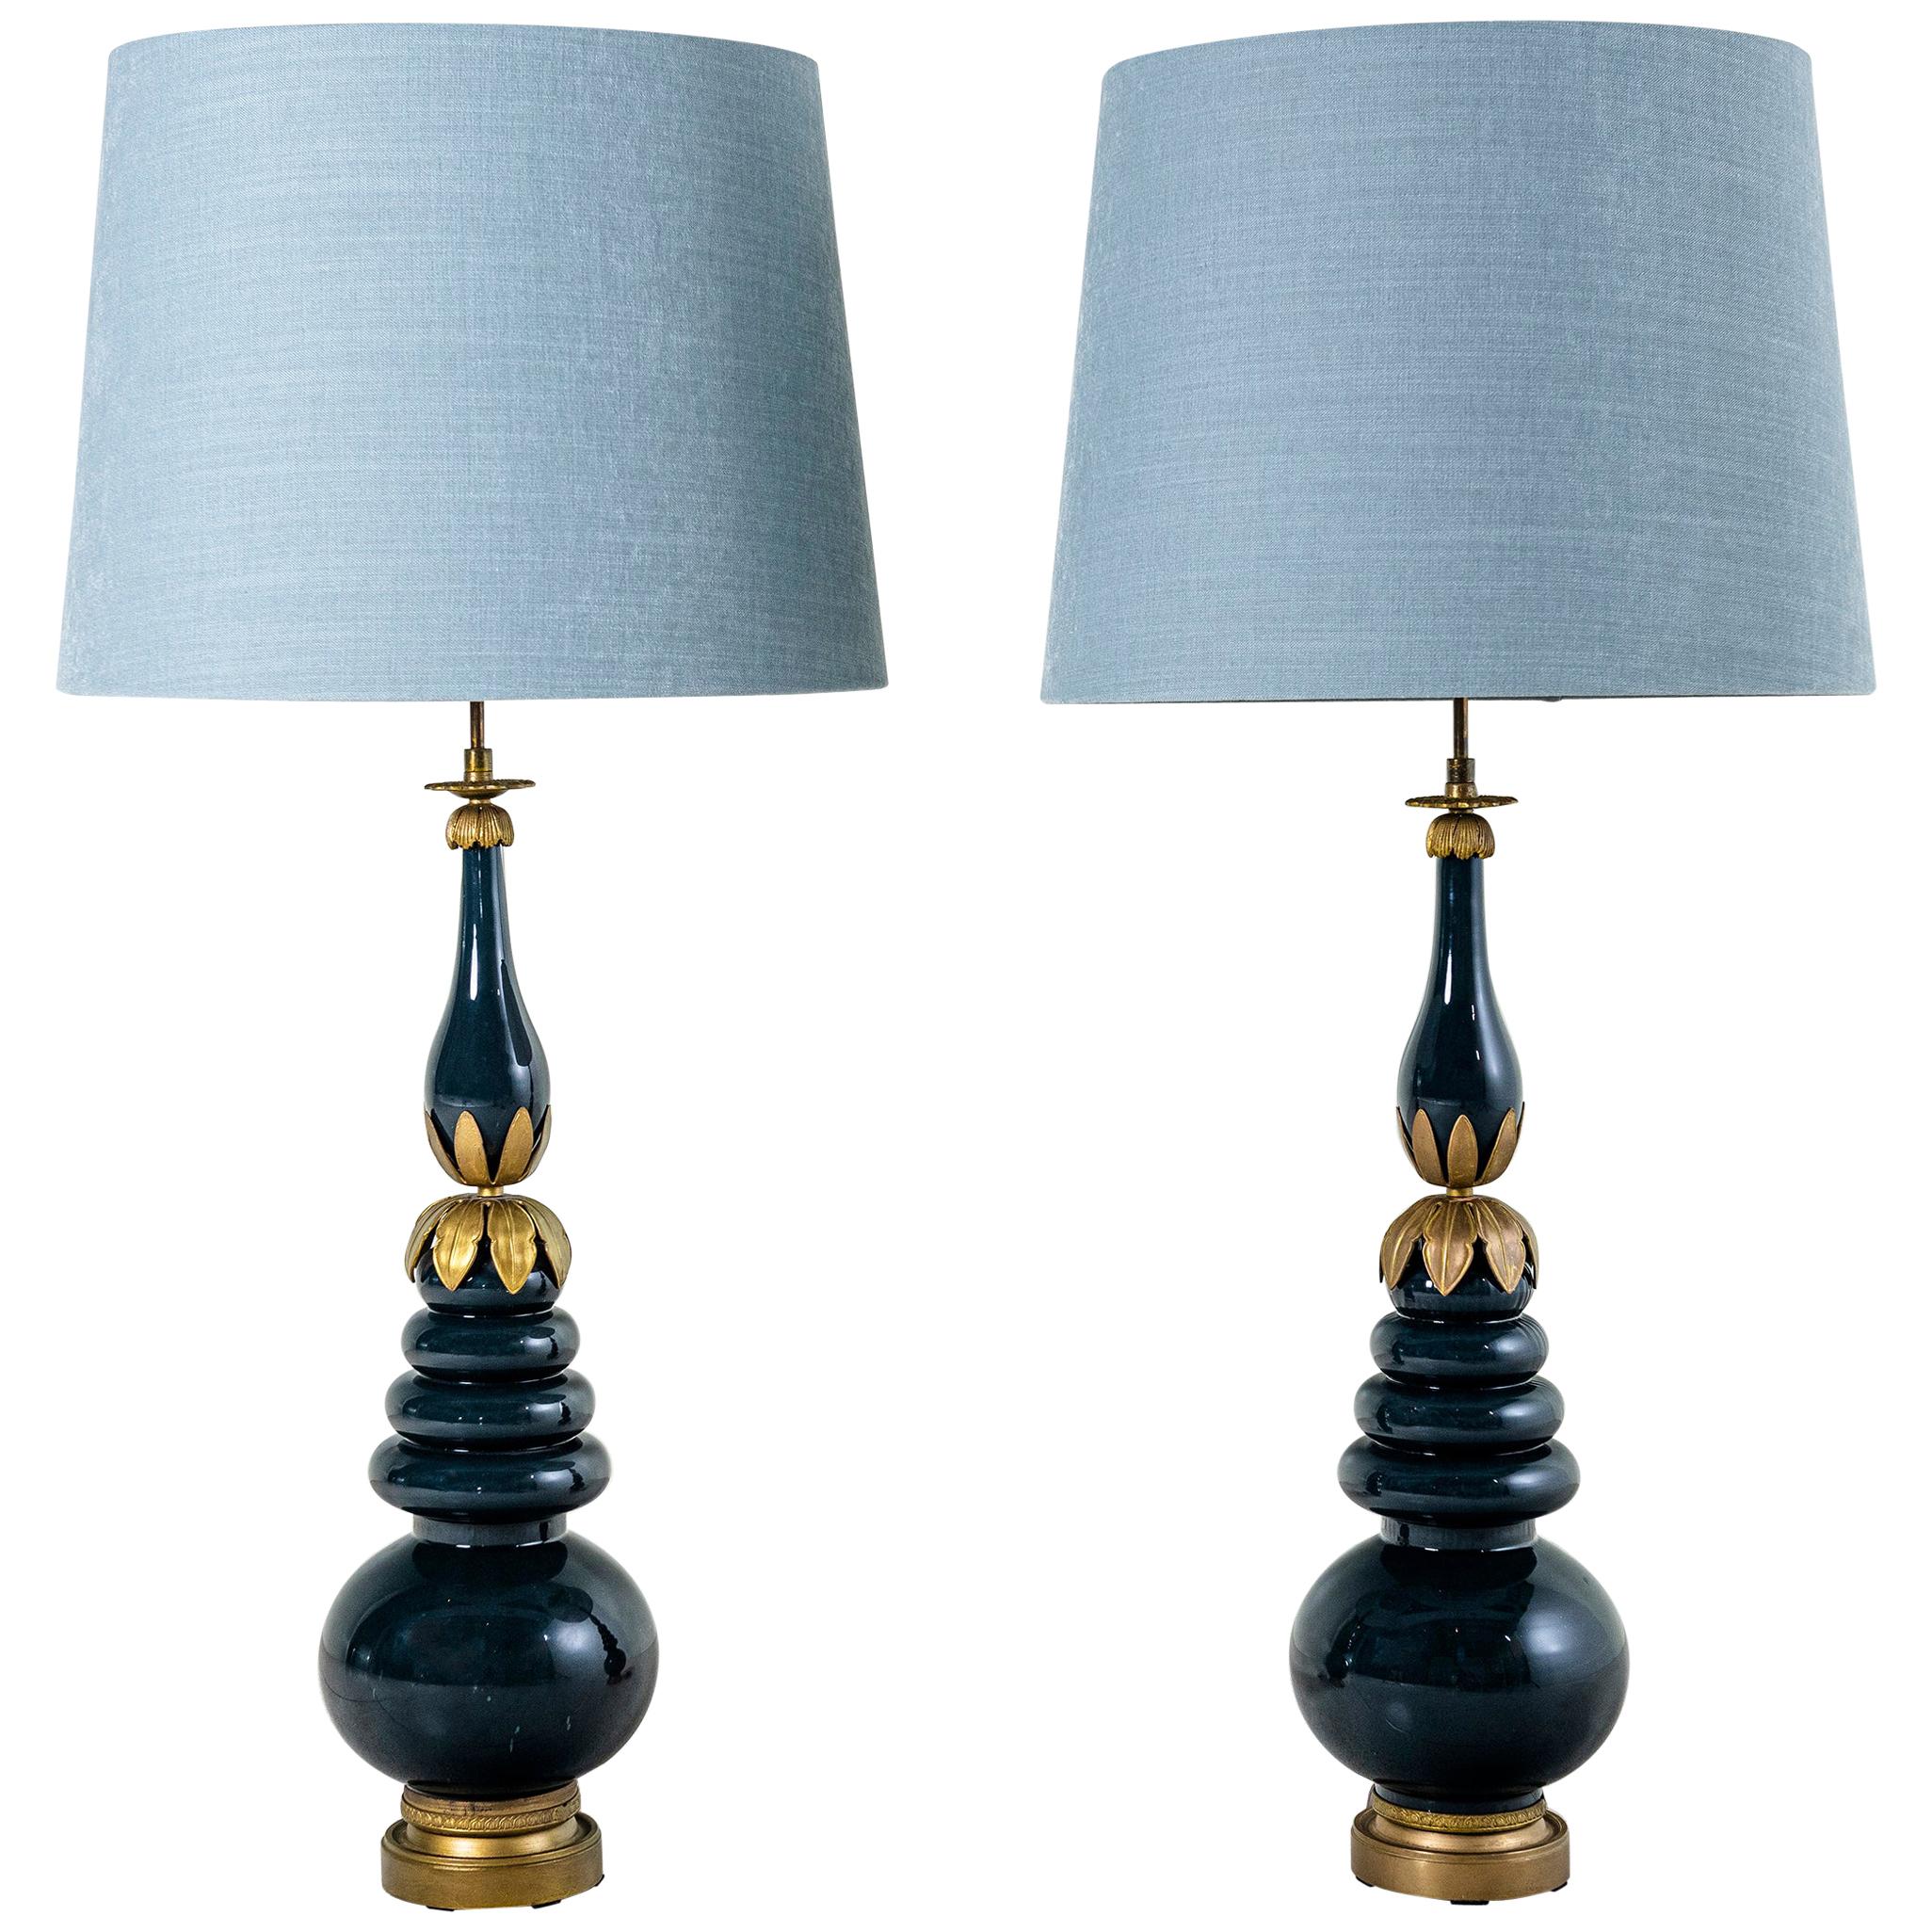 Pair of Bronze and Glass Table Lamps Attributed to Maison Jansen, France.